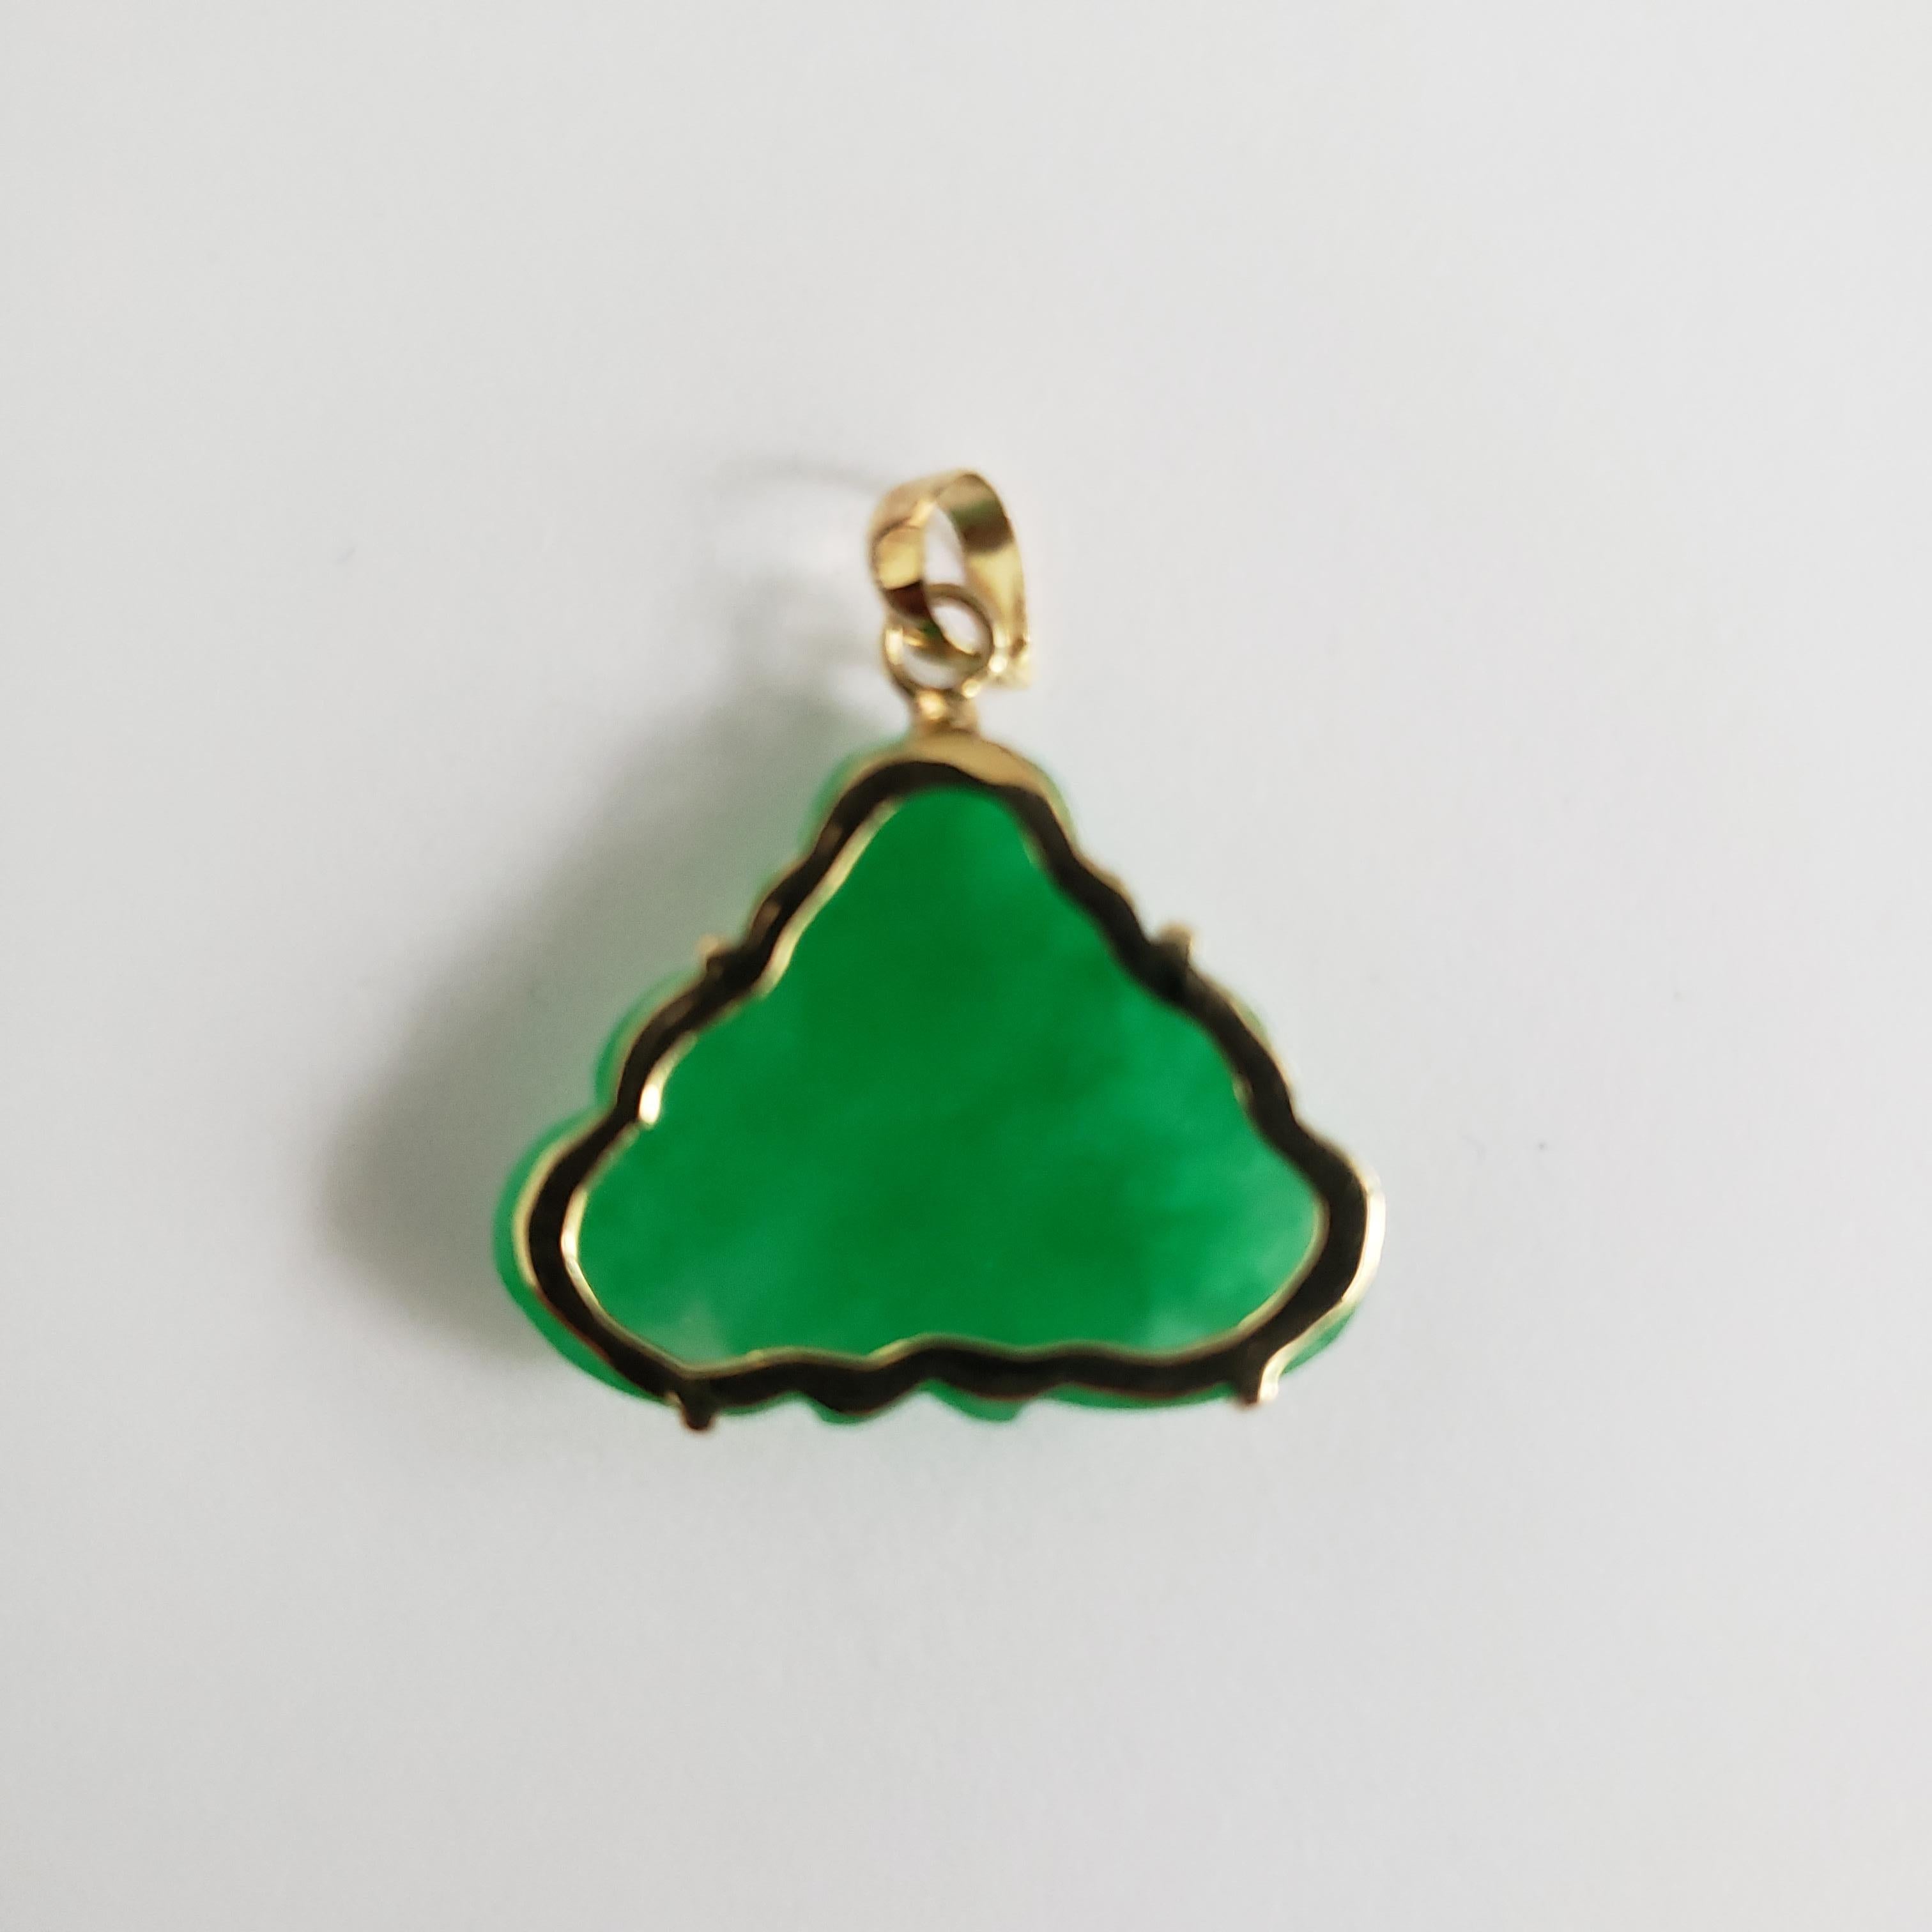 Guangdong Green Jade Buddha Pendant with Solid 18K Yellow Gold For Sale 12